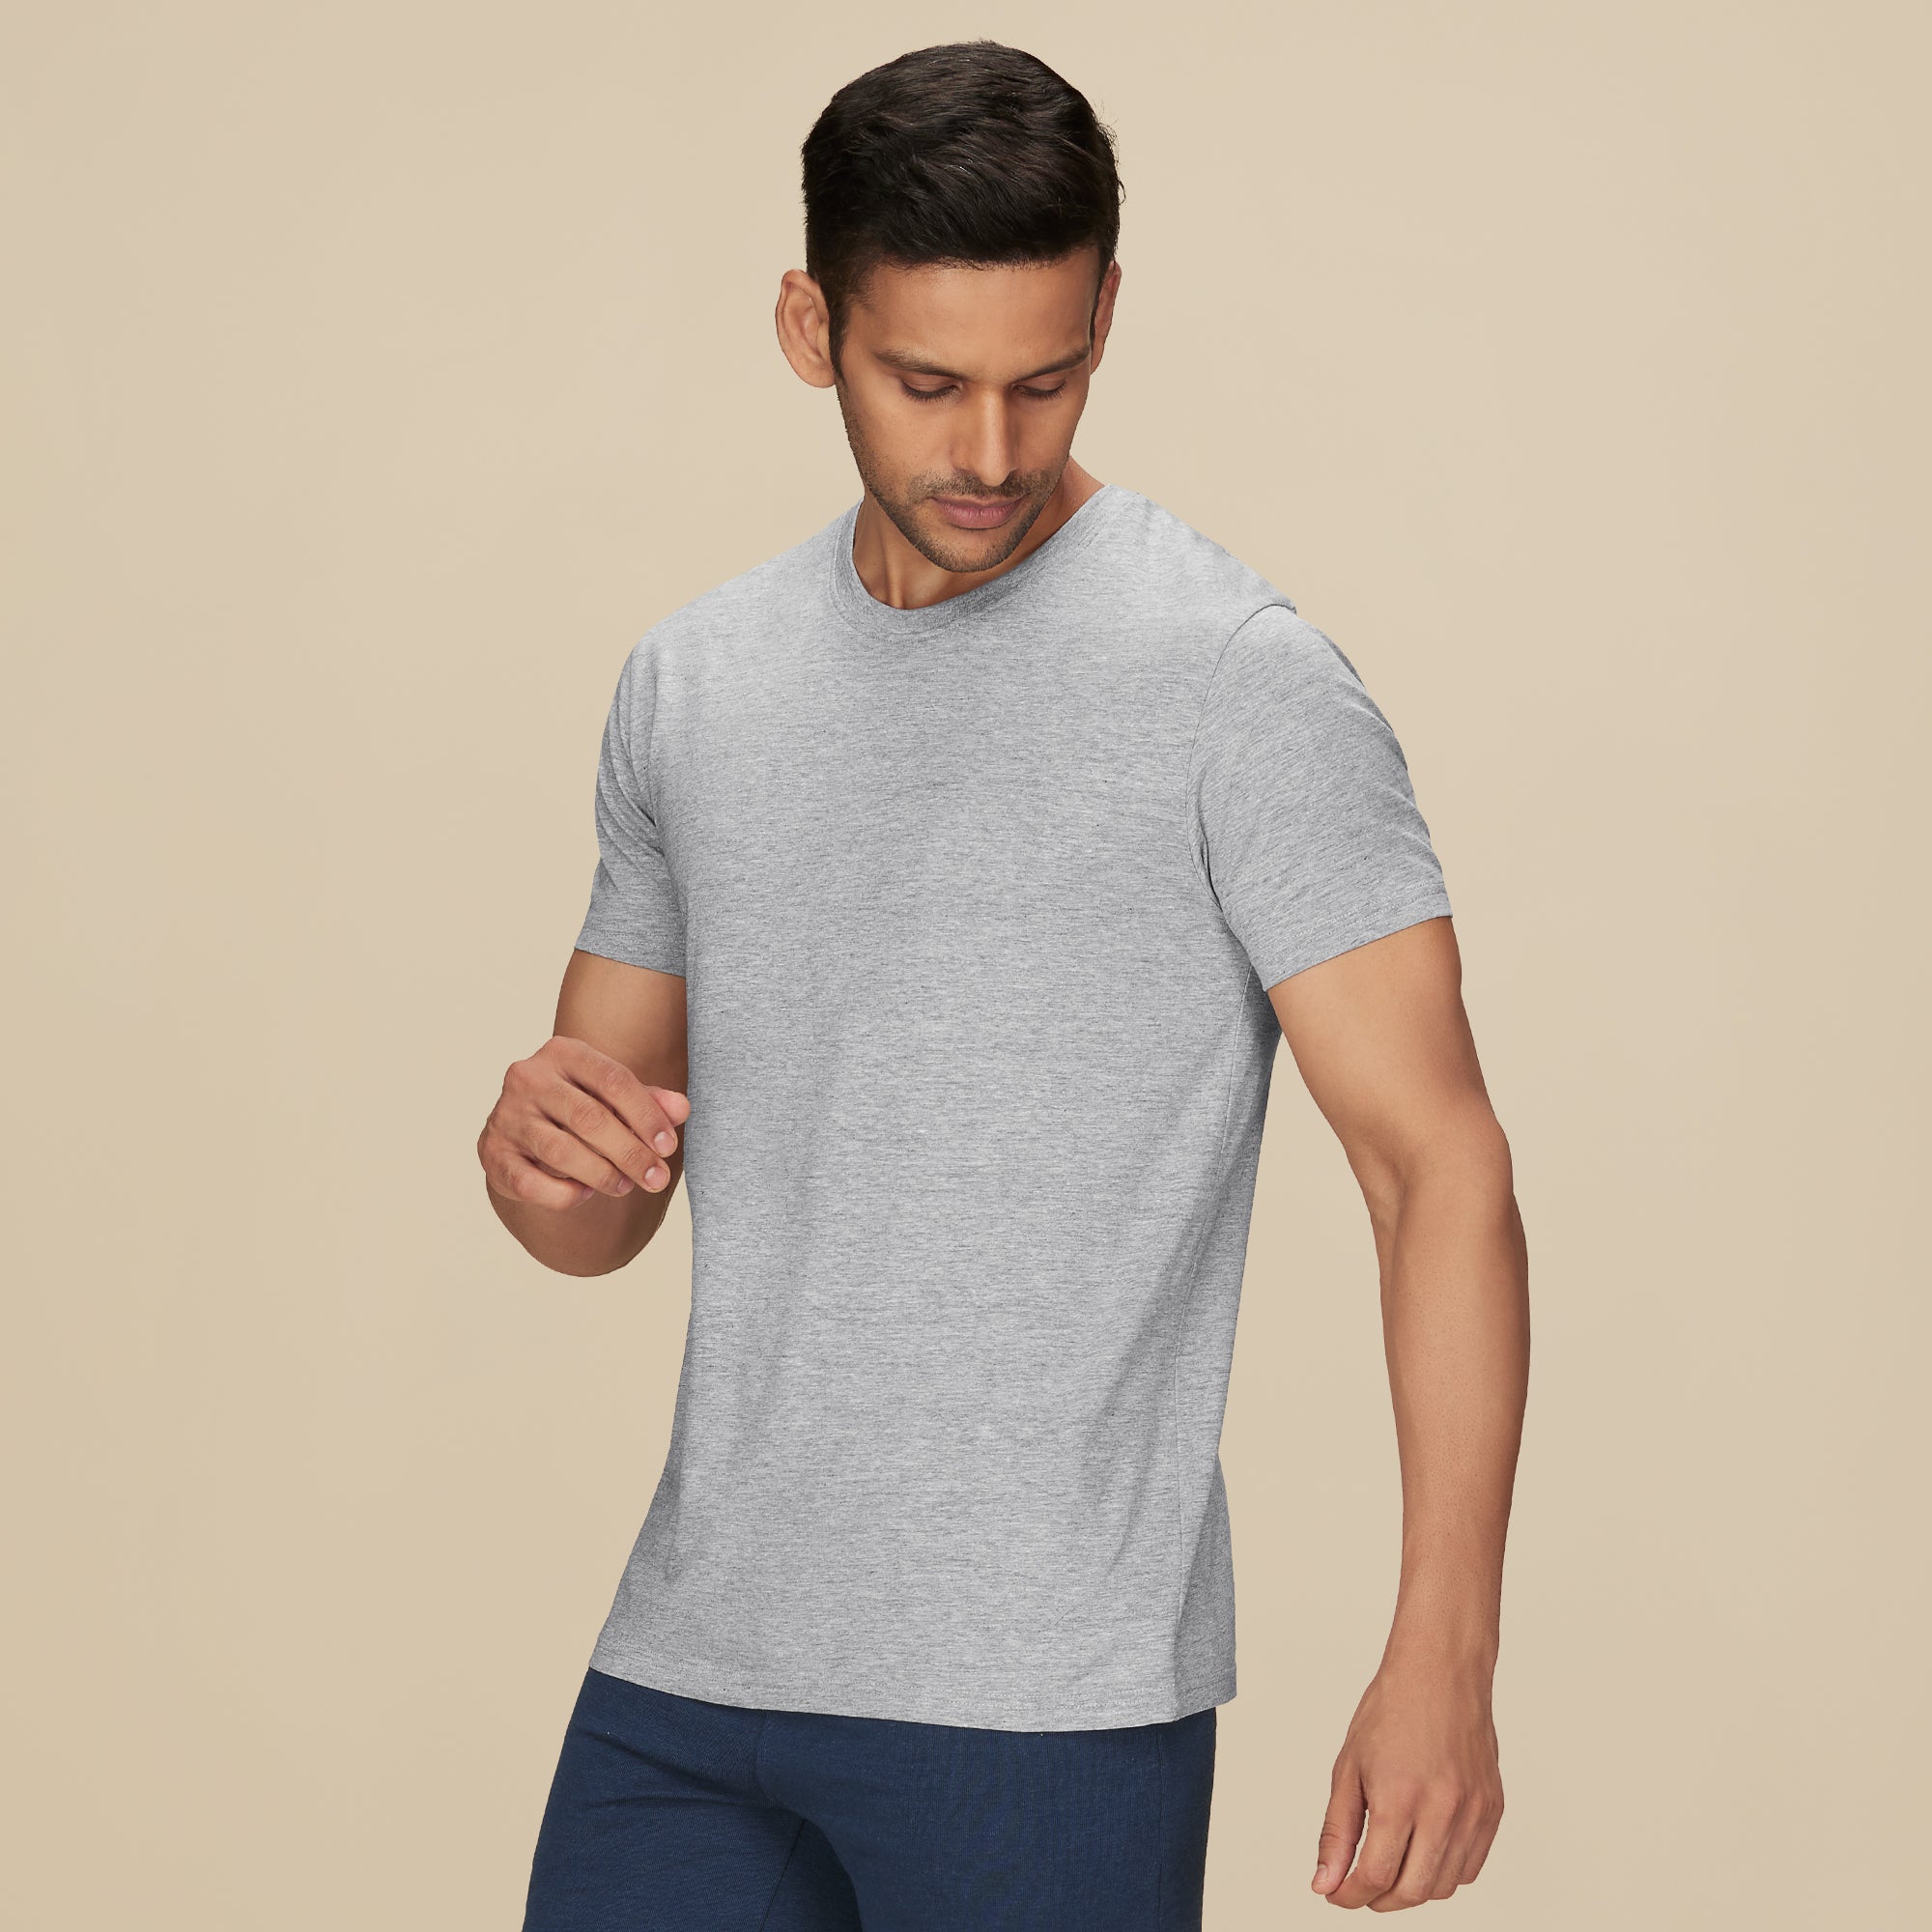 Pace Combed Cotton T-shirt for men Frost Grey - XYXX Mens Apparels